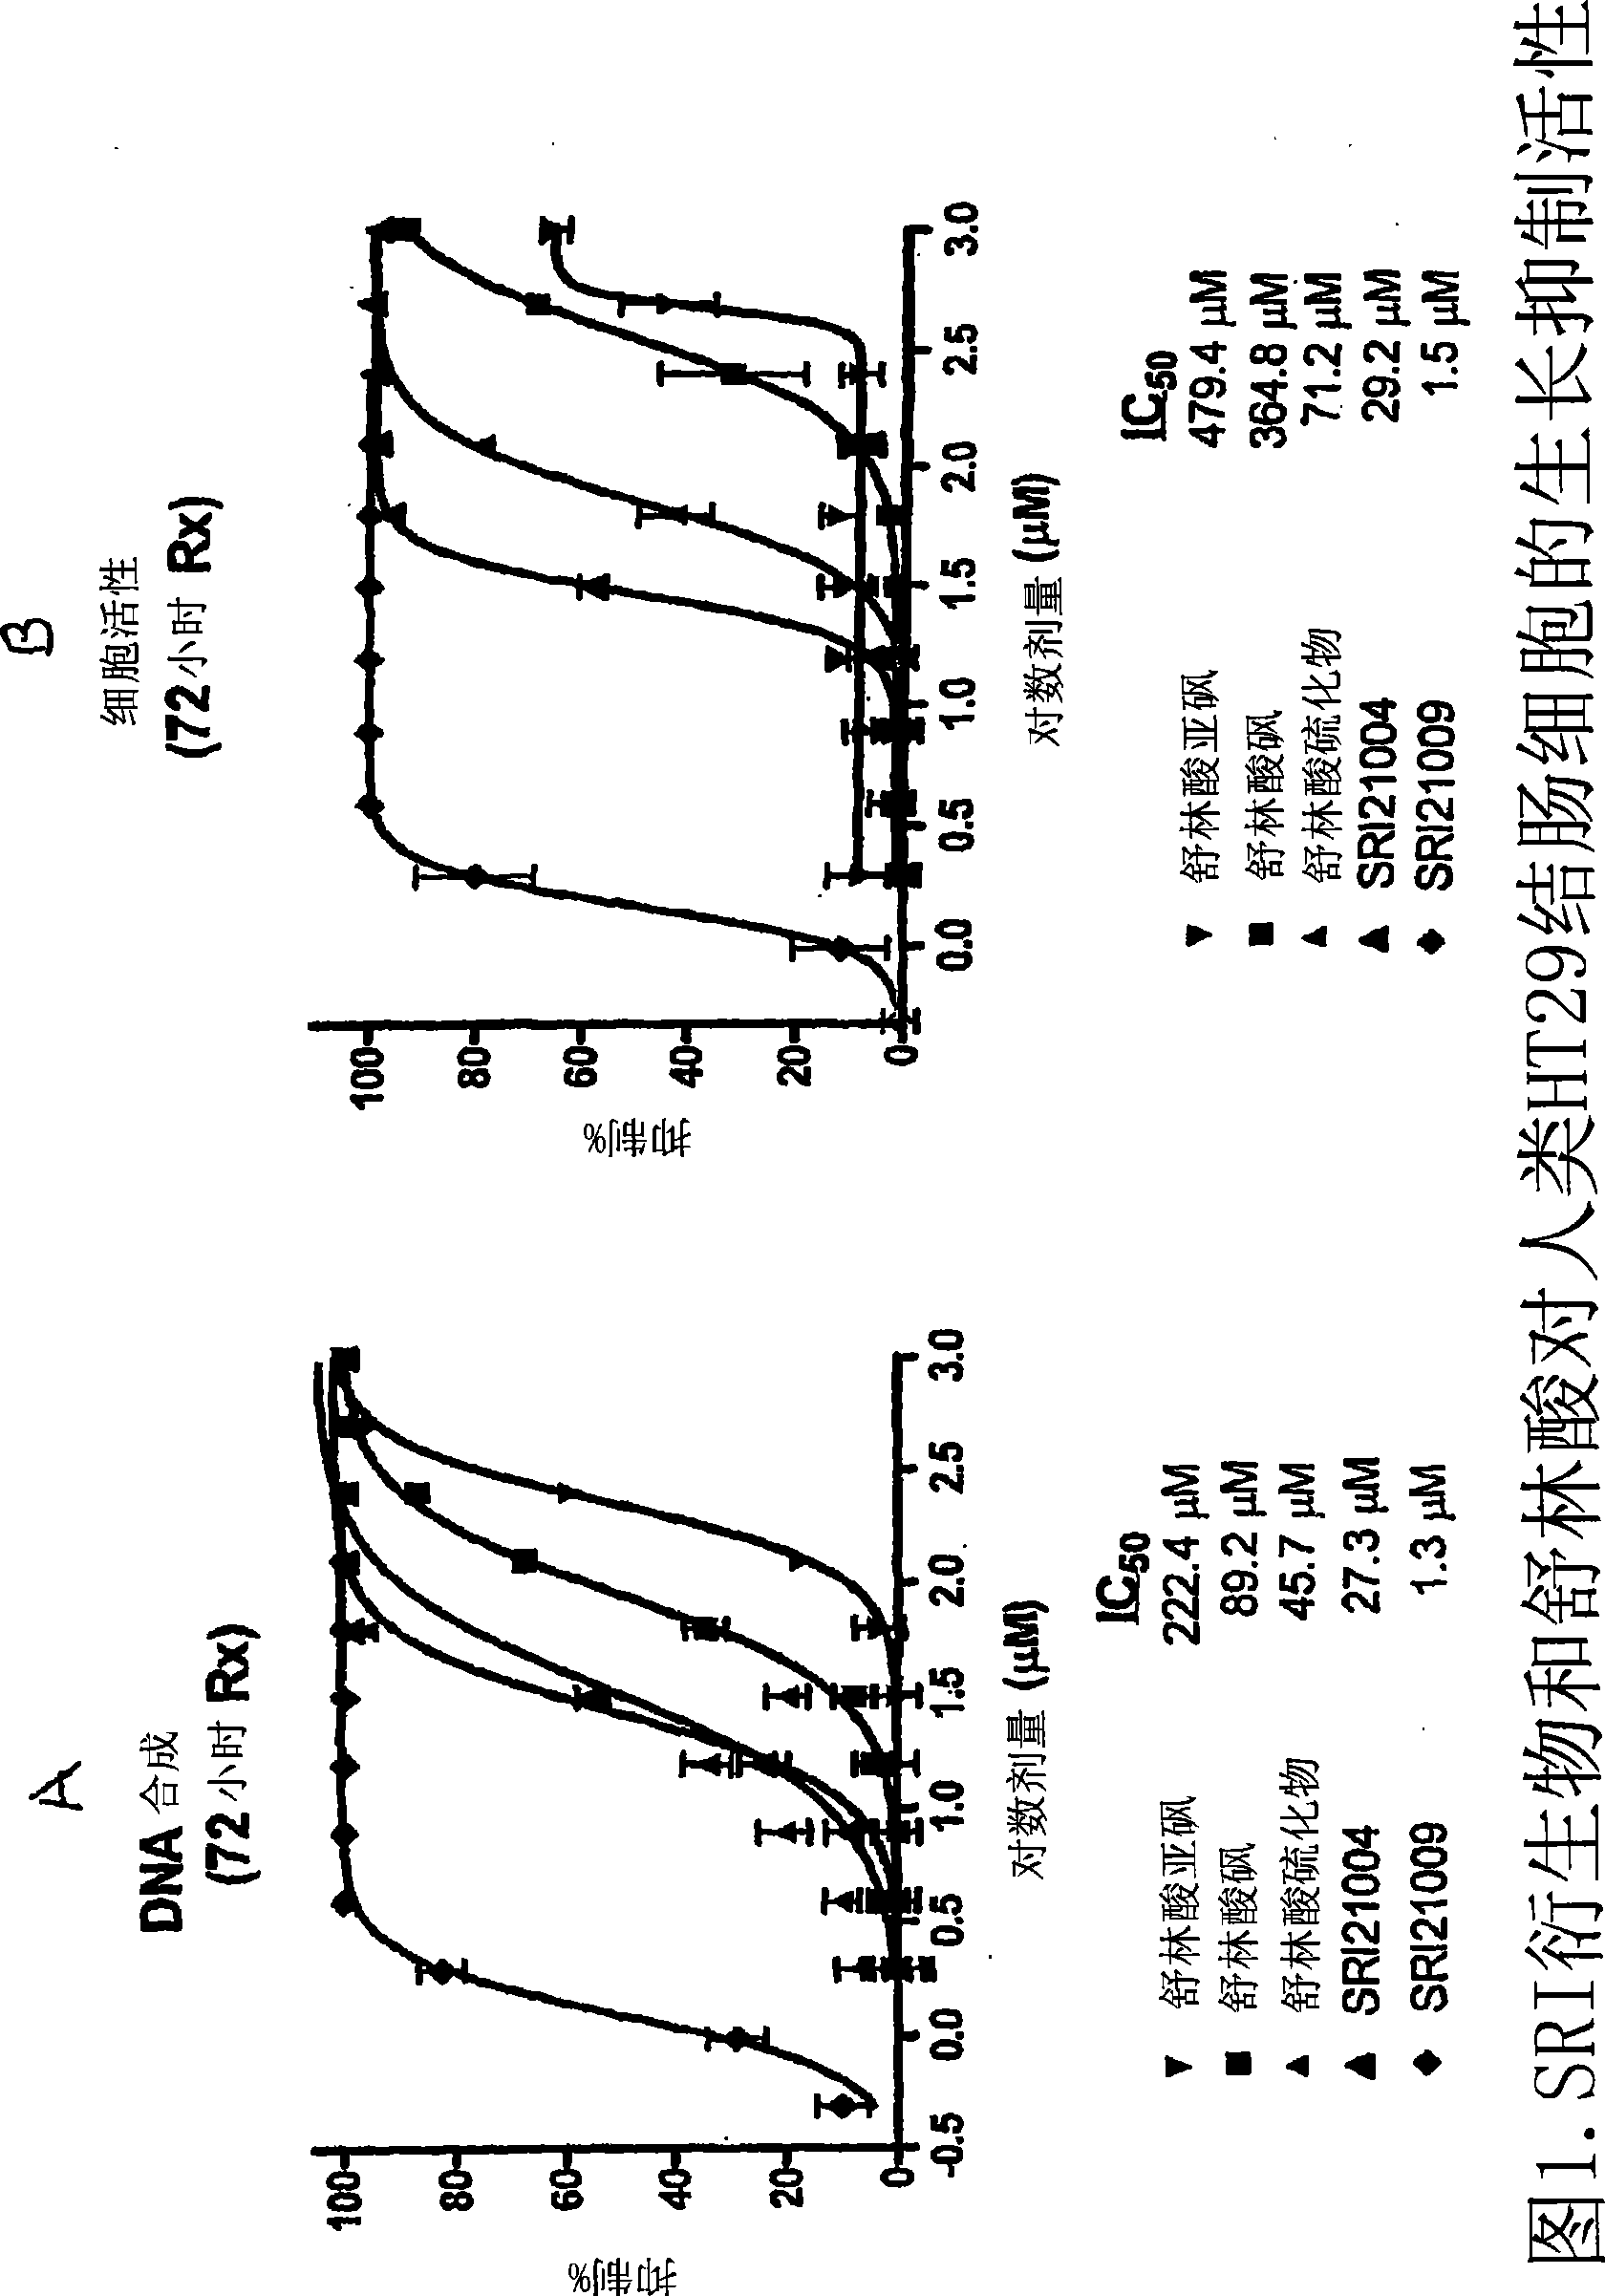 Derivatives of sulindac, use thereof and preparation thereof